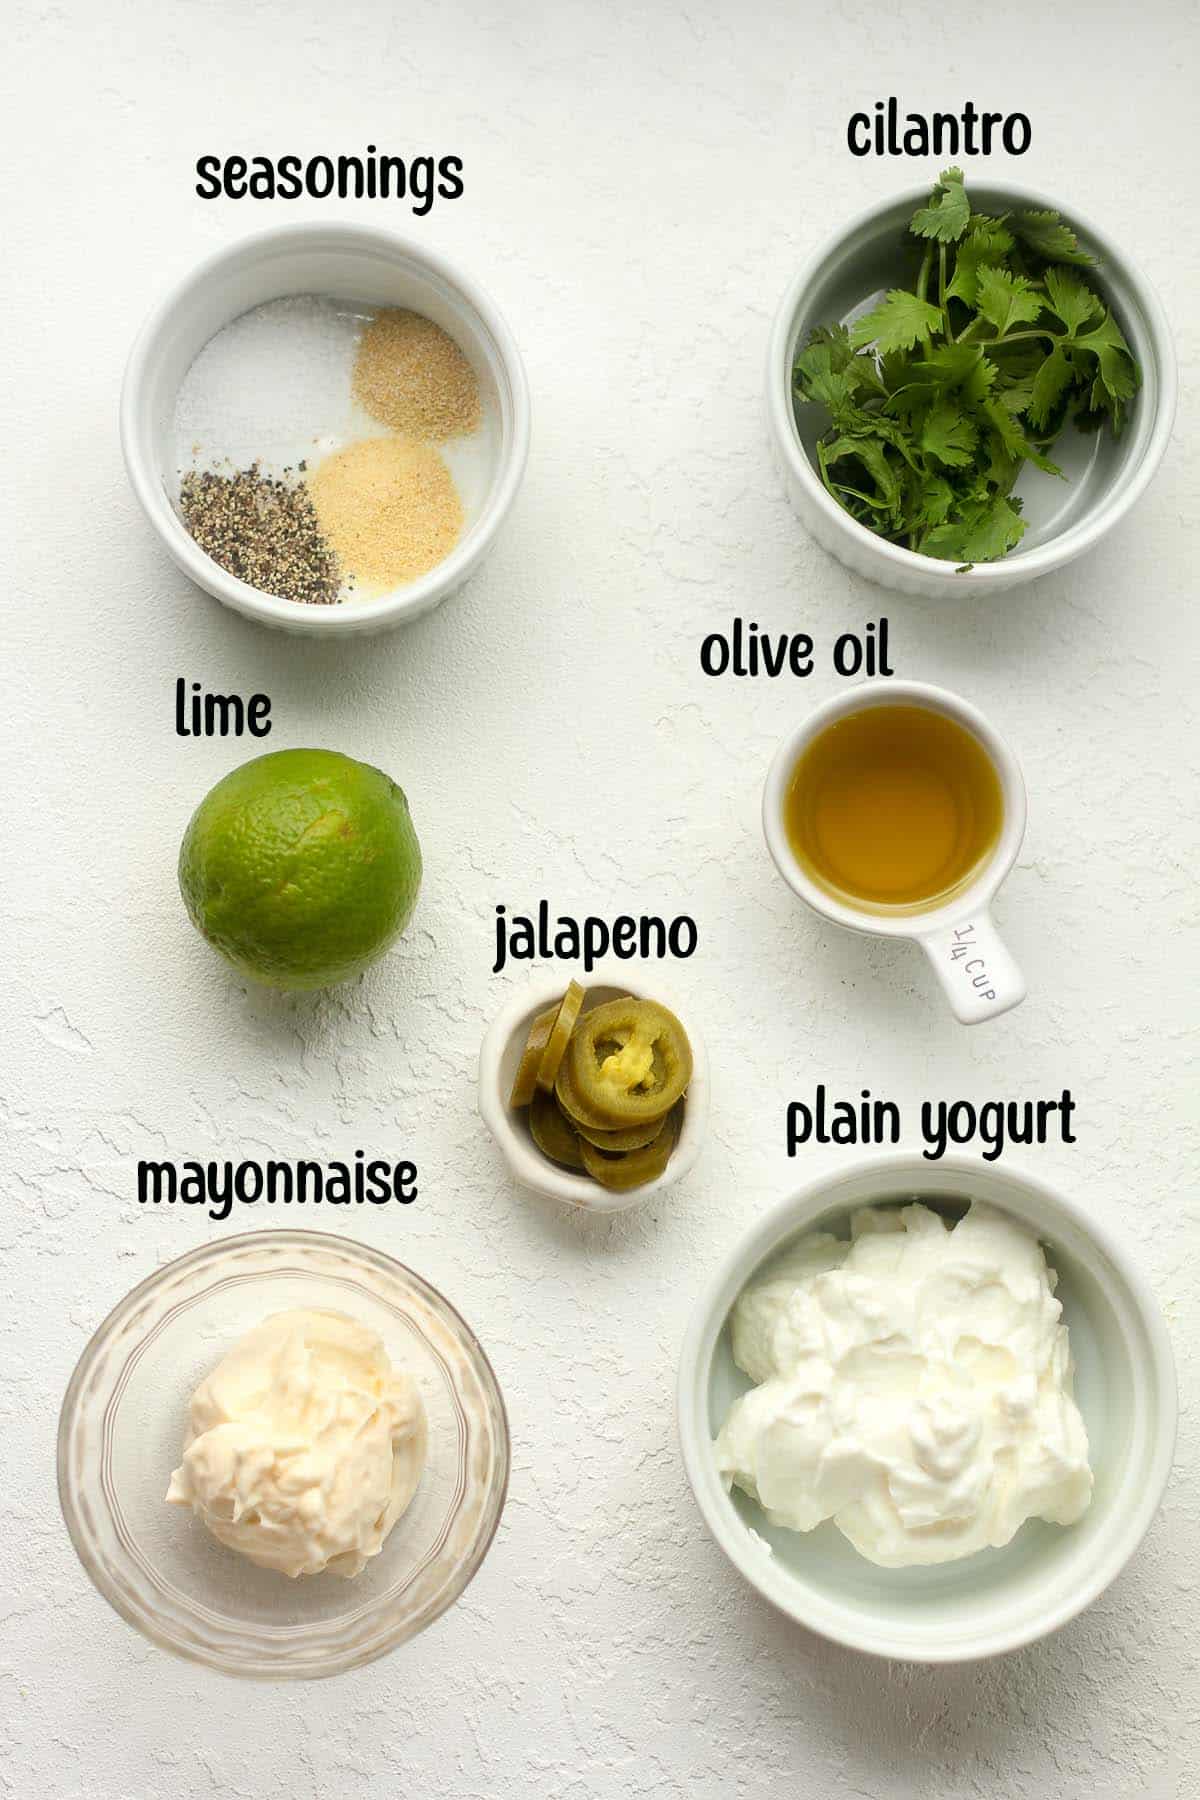 The ingredients for jalapeno ranch dressing.